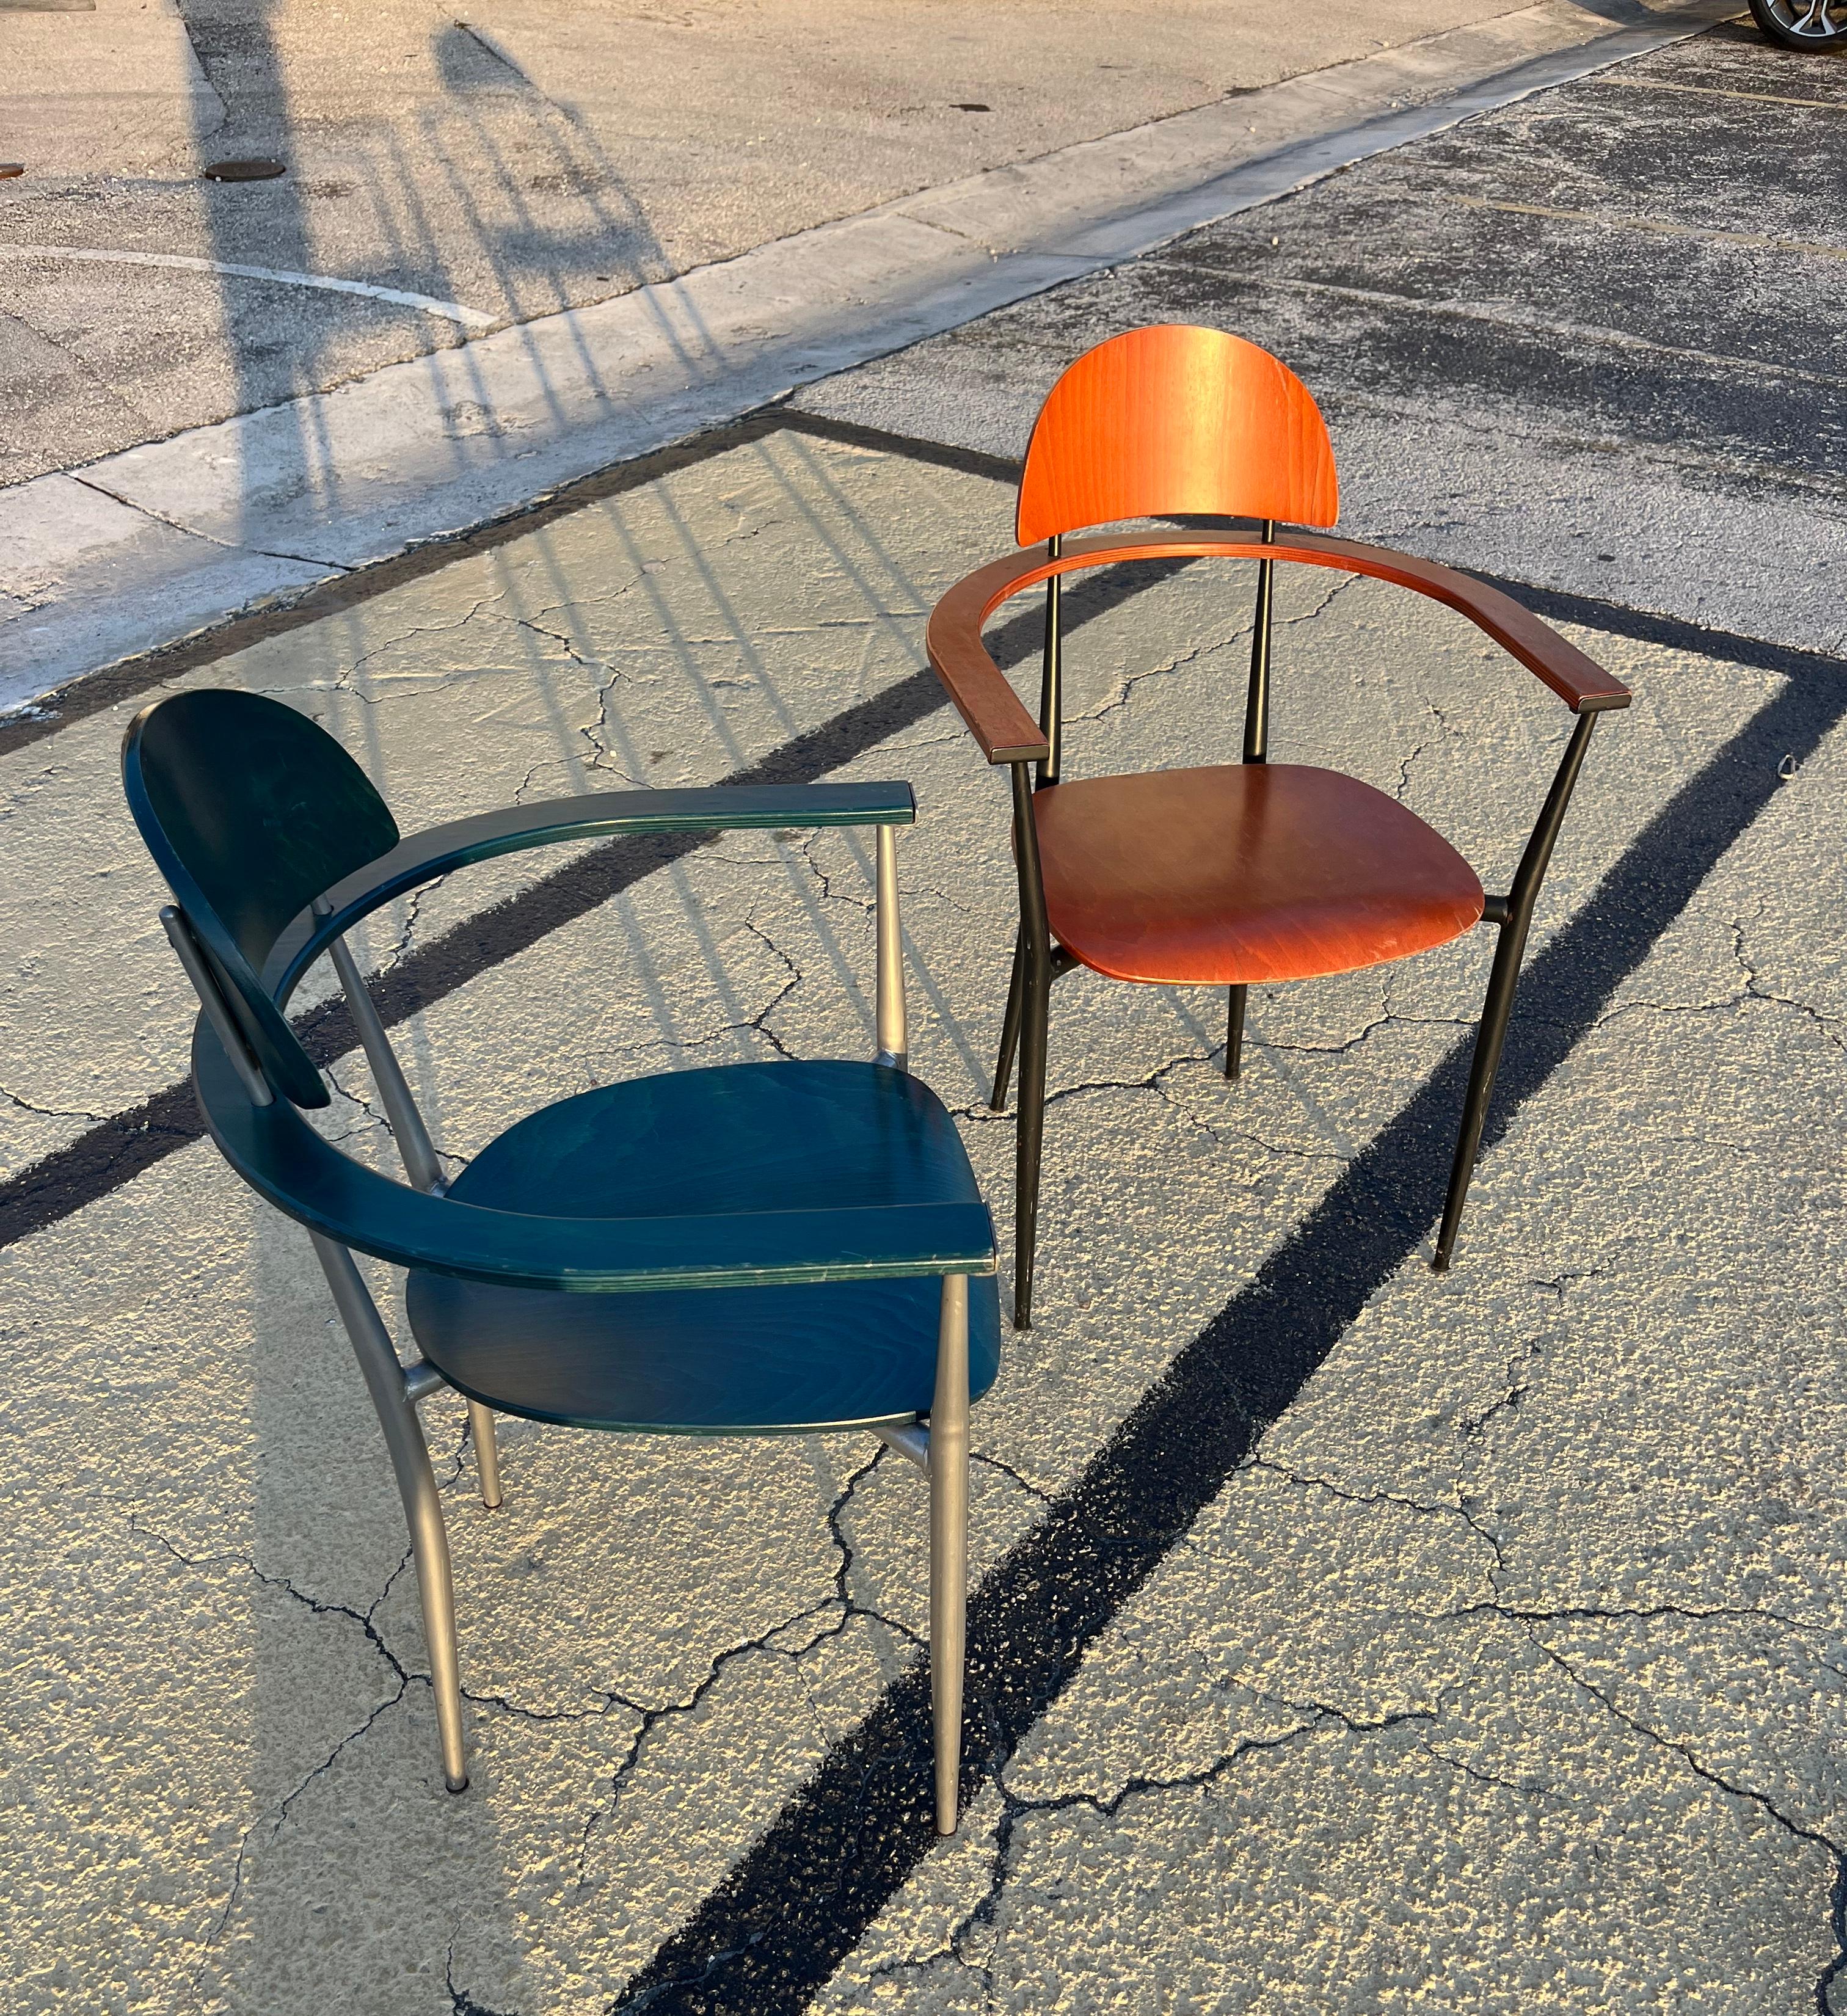 A Pair of Vintage Postmodern Dining / Accent Chairs in the Arrben Stiletto Chairs Style. Circa 1980s 
Feature bent plywood seats, armrests, and backrests with steel frames painted in back and silver color. The chairs come in contrasting burnt orange